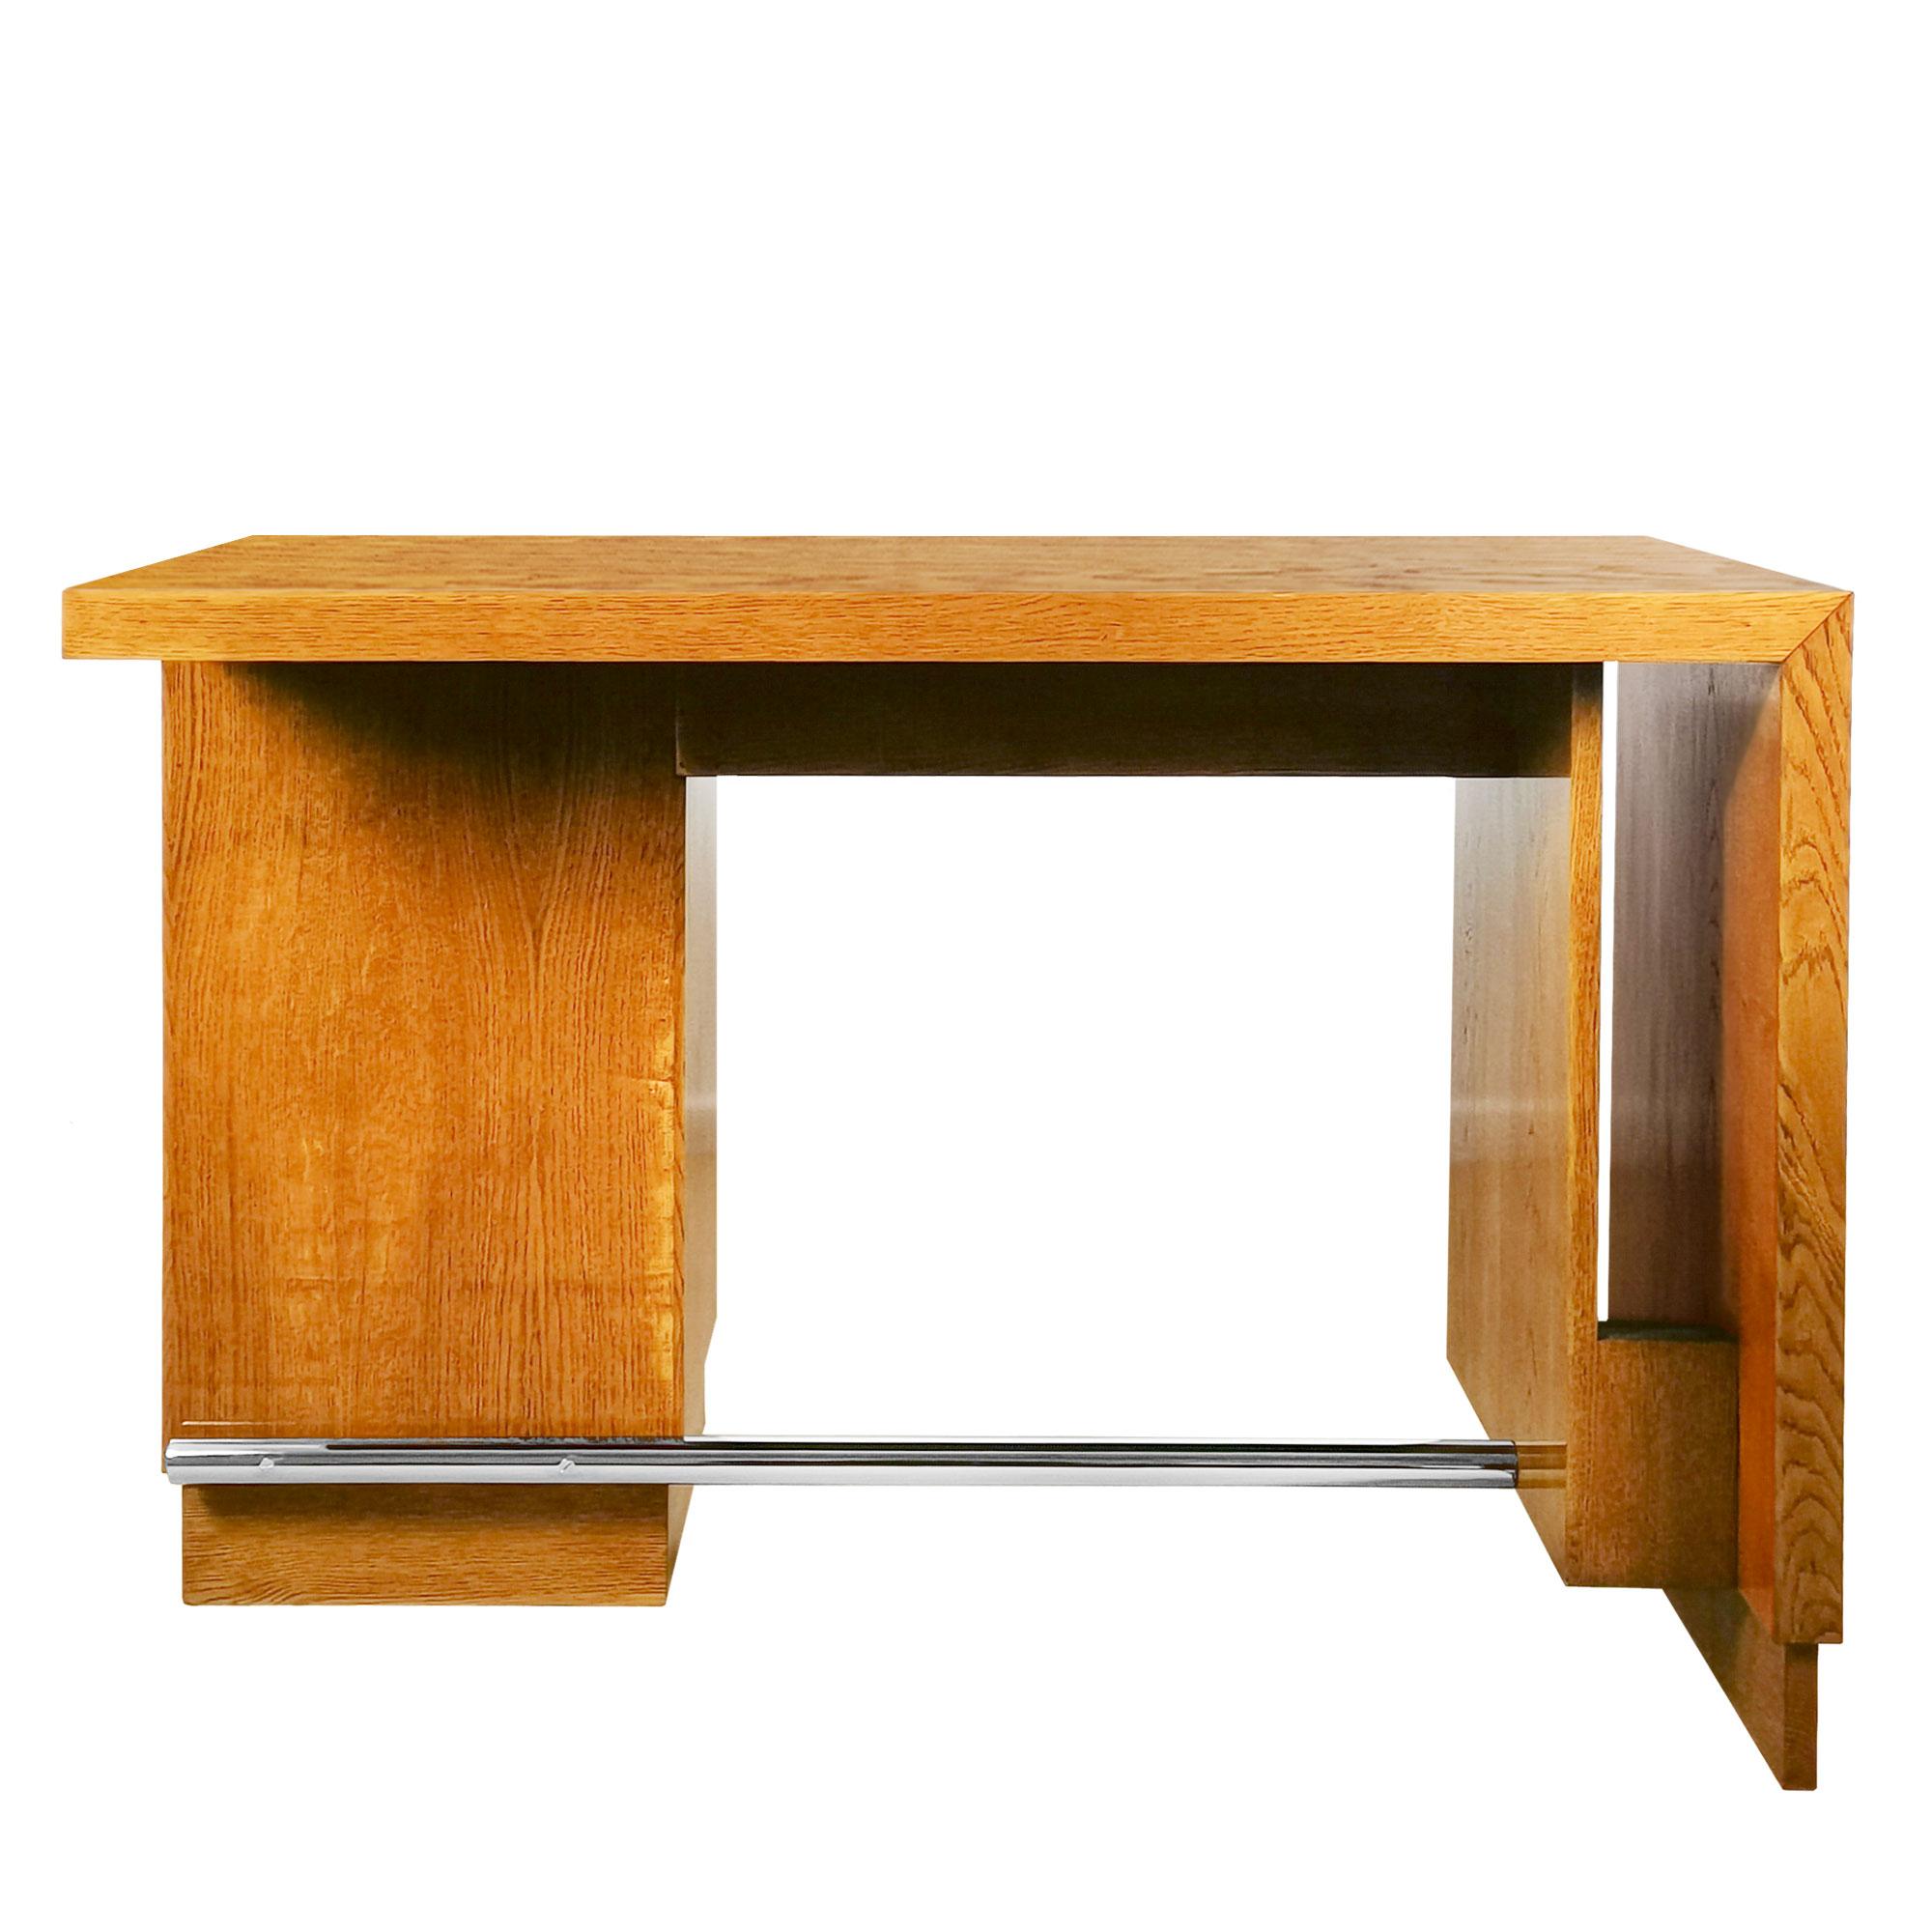 Small Art Deco Cubist Desk in Solid Oak The Style Francisque Chaleyssin- France In Good Condition For Sale In Girona, ES